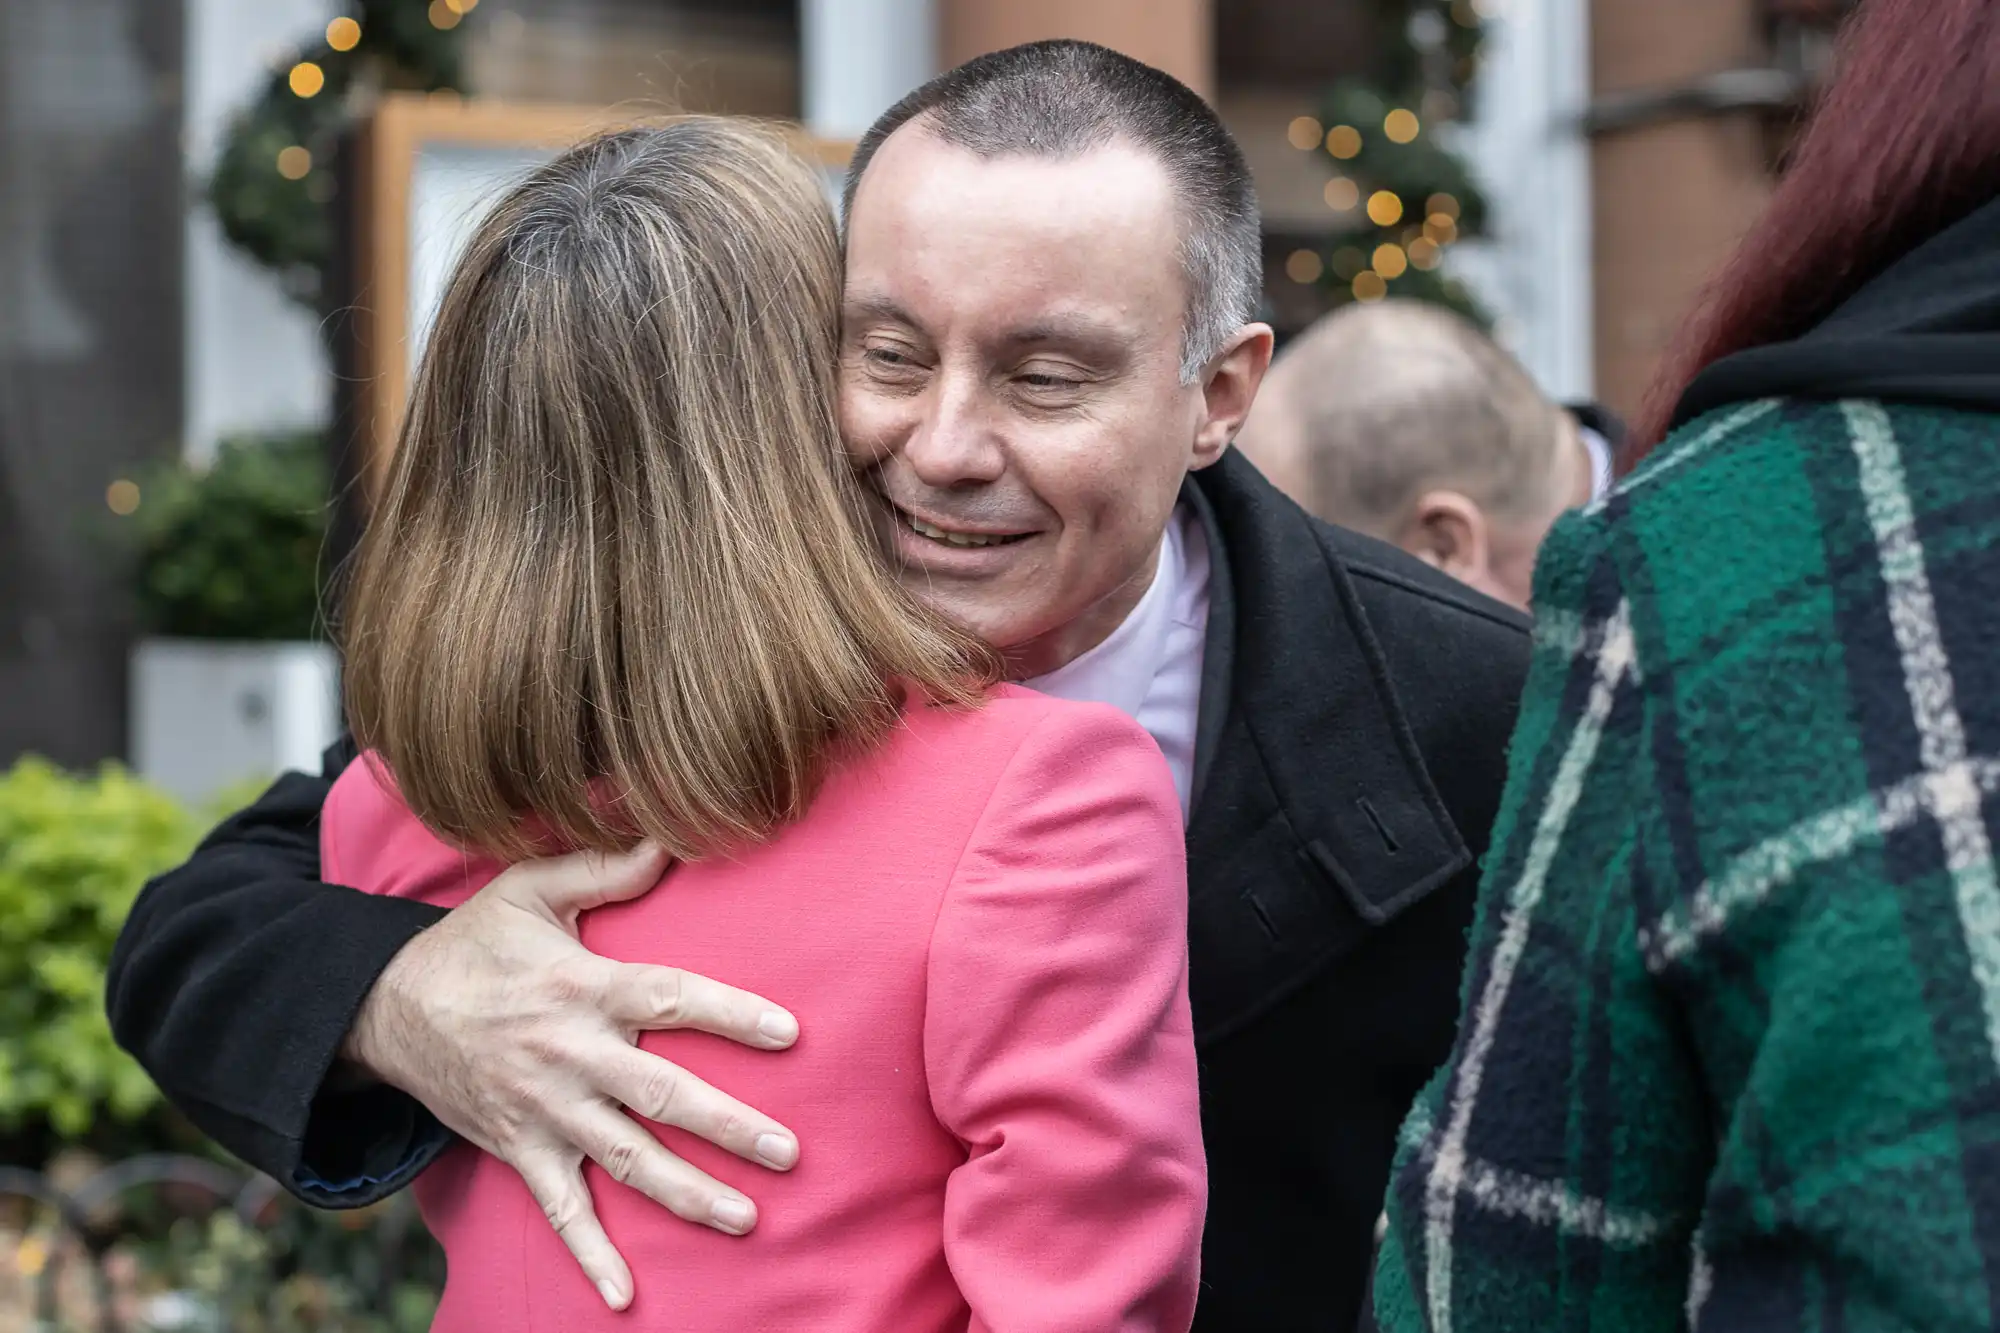 Two people are hugging outside in a festive setting. The person facing the camera is smiling warmly, while the other has their back turned, wearing a pink jacket. Other people are visible in the background.